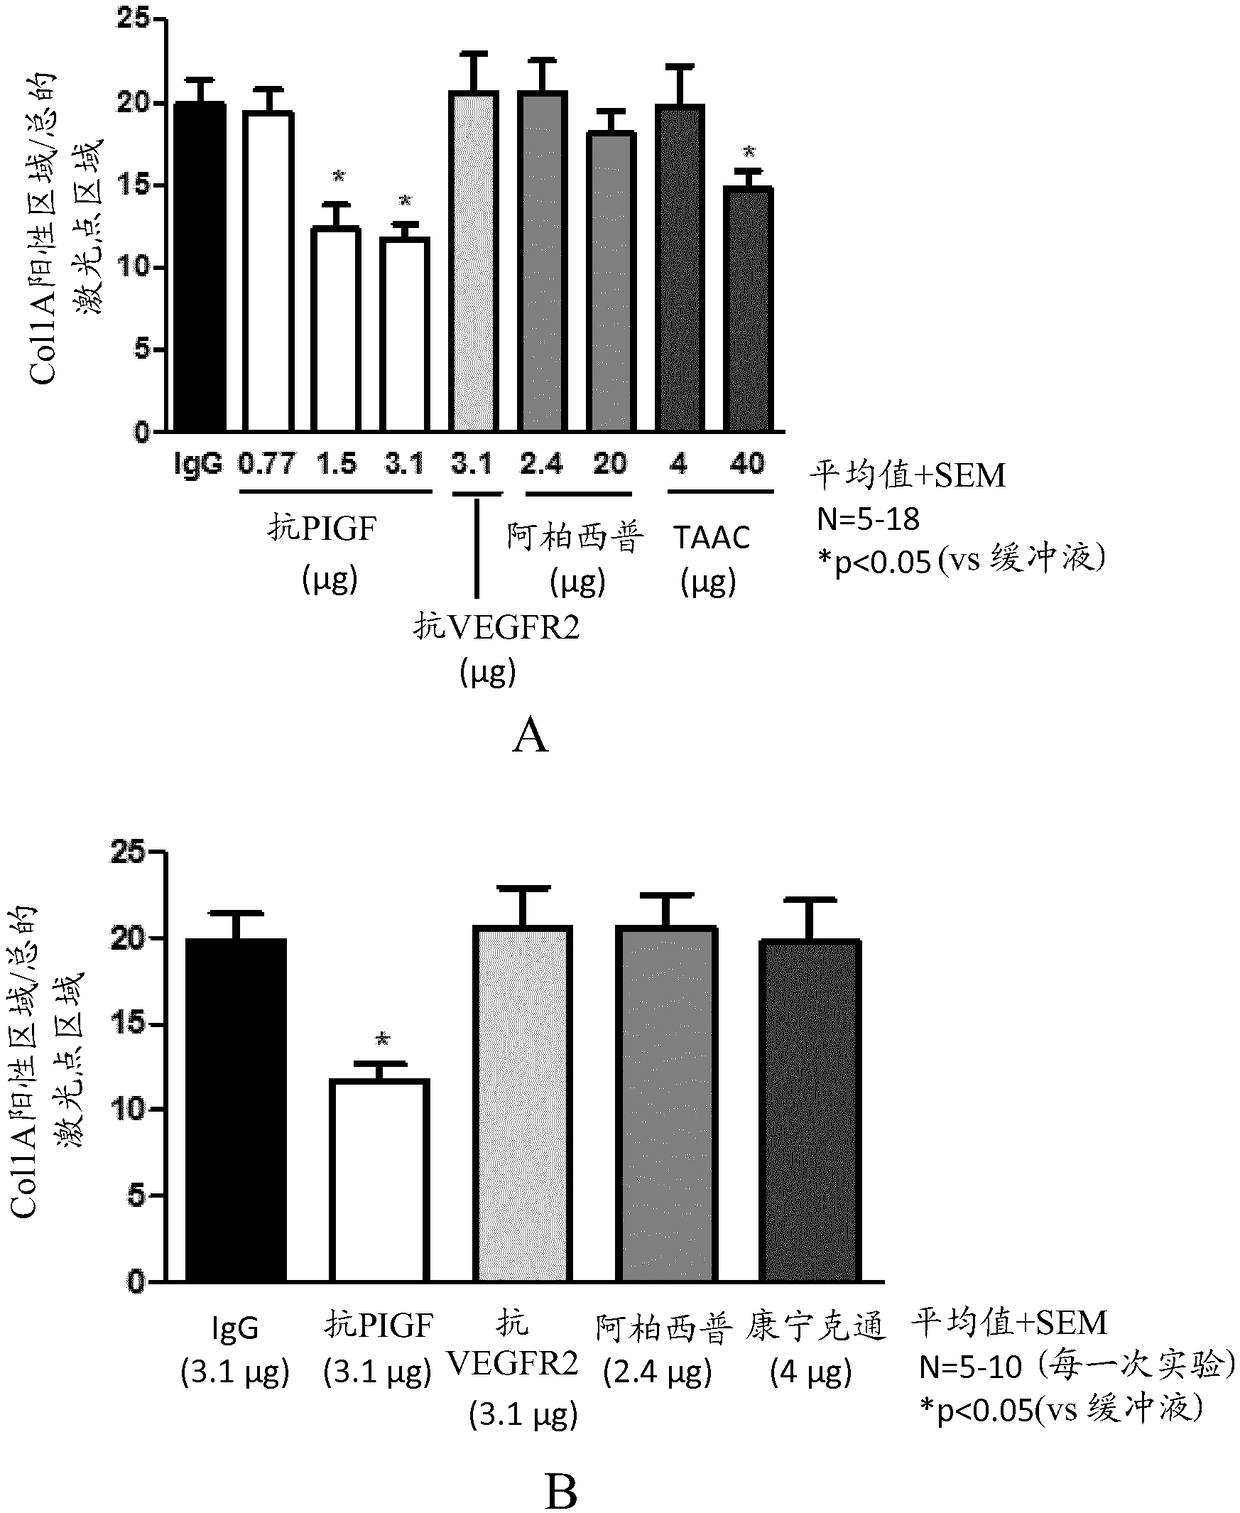 Posterior ocular fibrosis inhibition by antagonizing placental growth factor